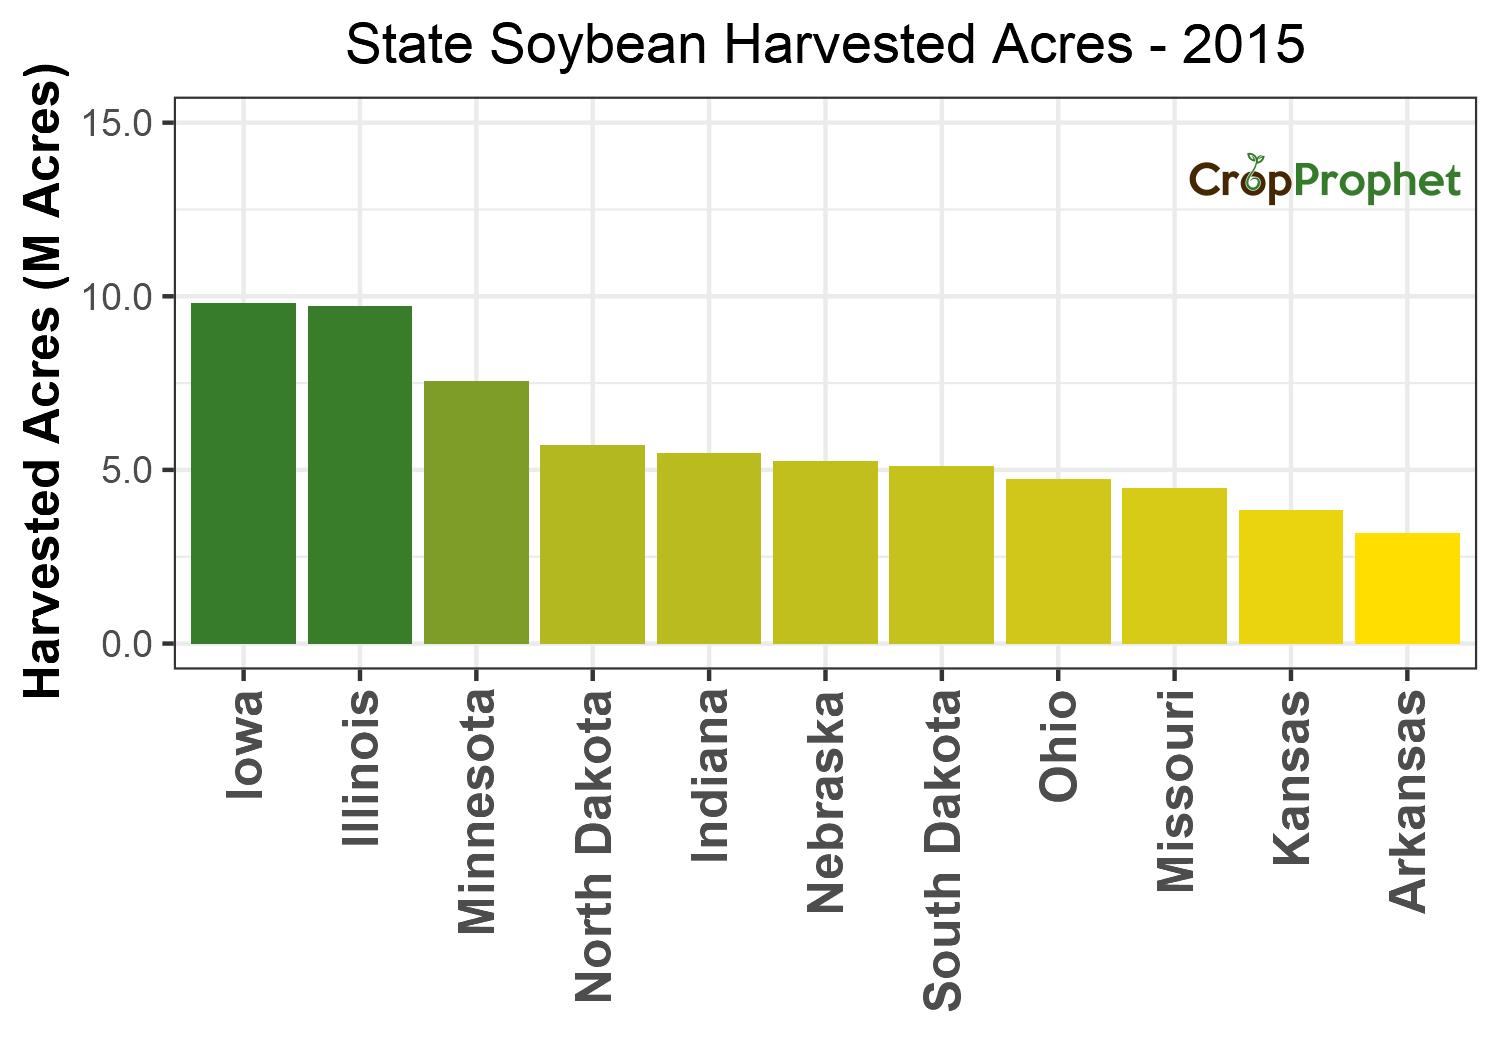 Soybean Harvested Acres by State - 2015 Rankings